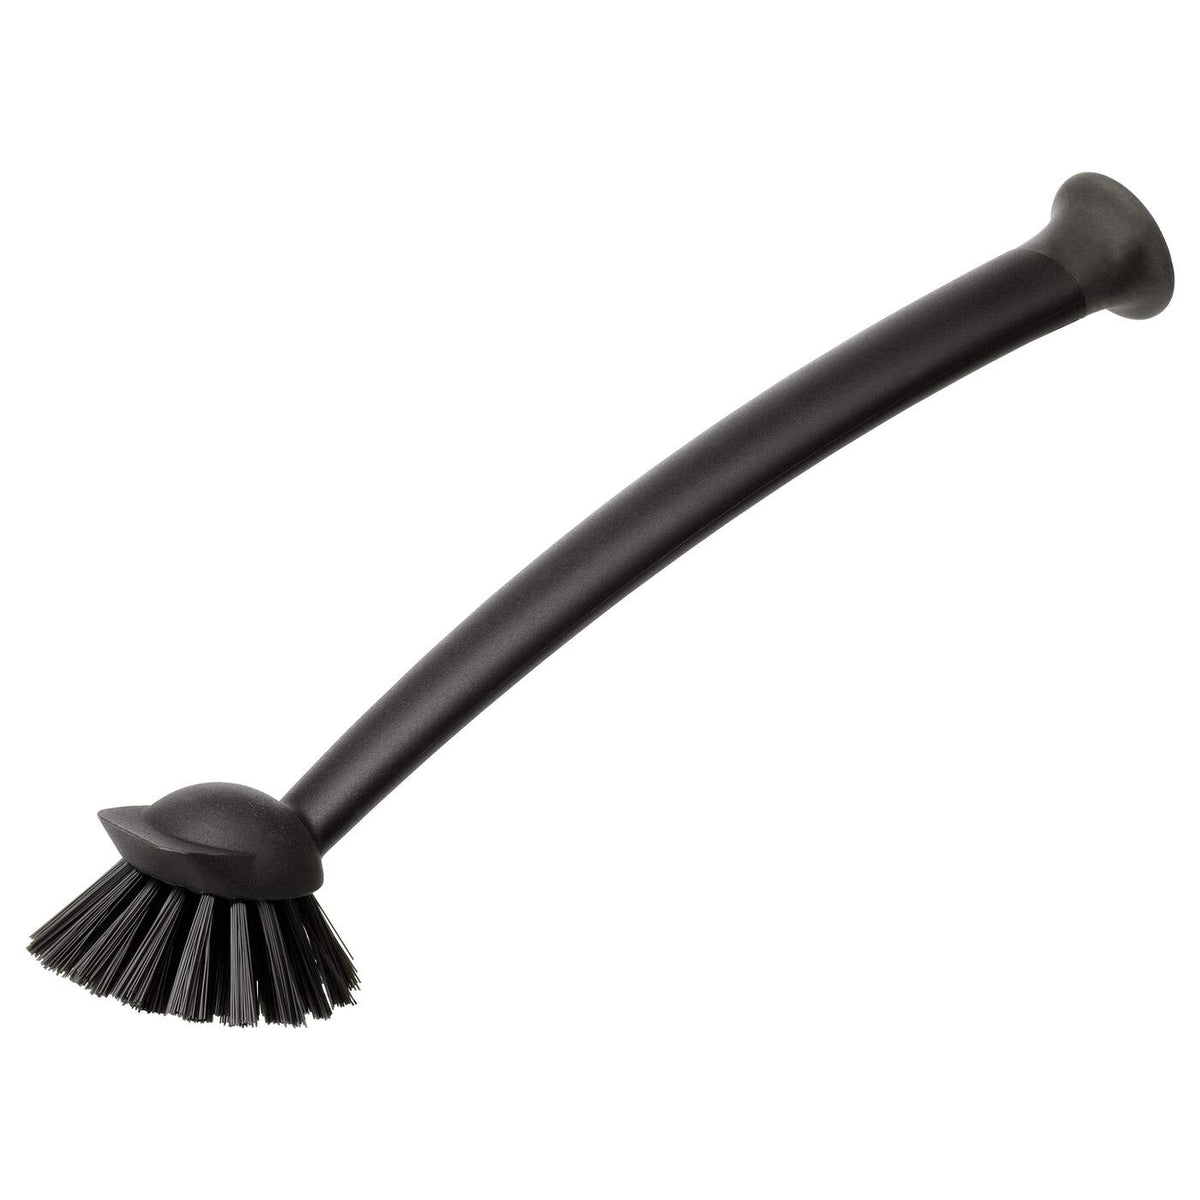 IKEA RINNIG Dish-Washing Brush: Your Kitchen Cleaning Essential